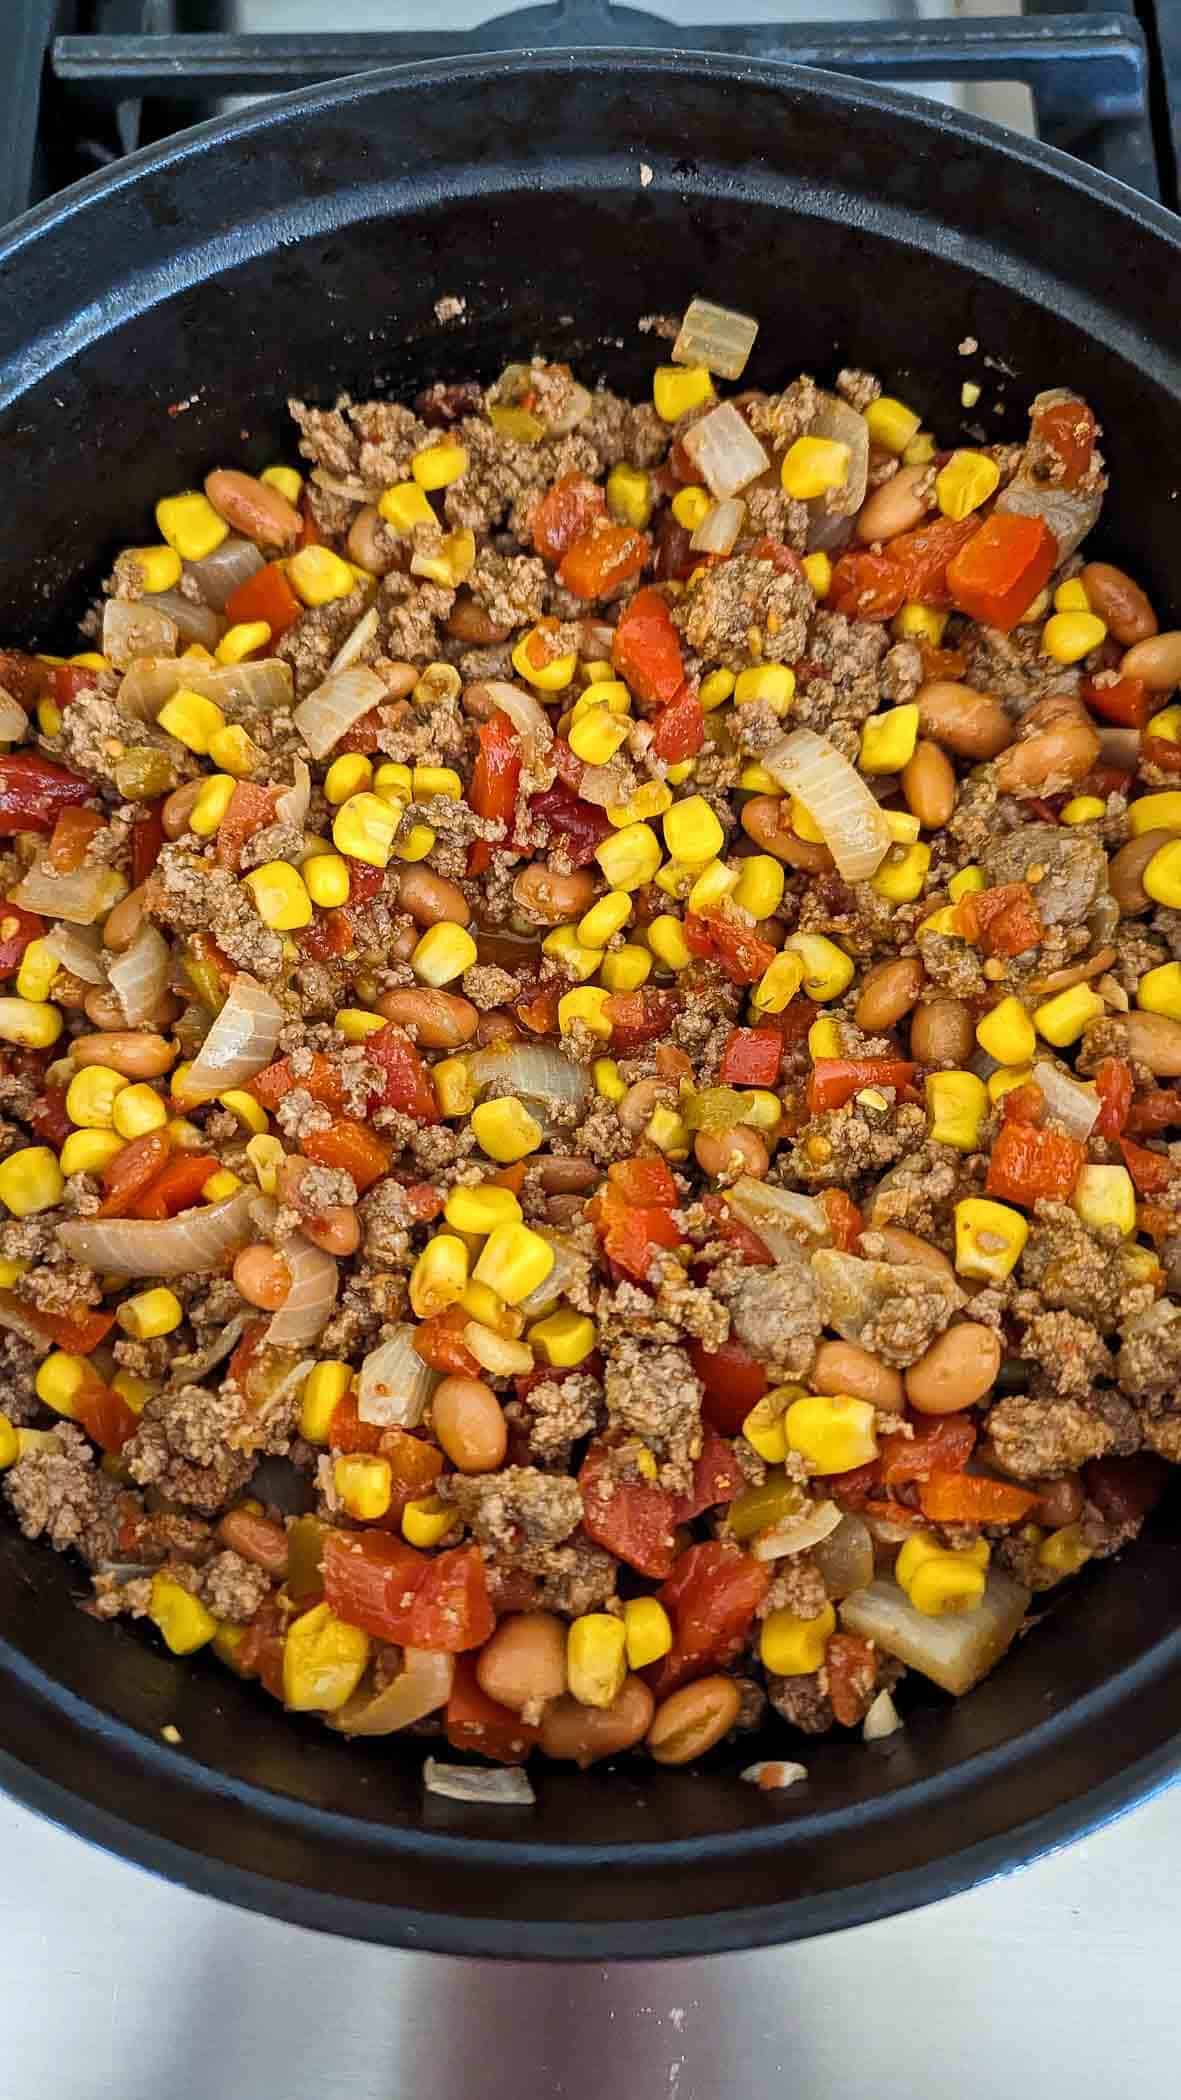 cooked ground beef mixture with rotel, corn, and spices added.